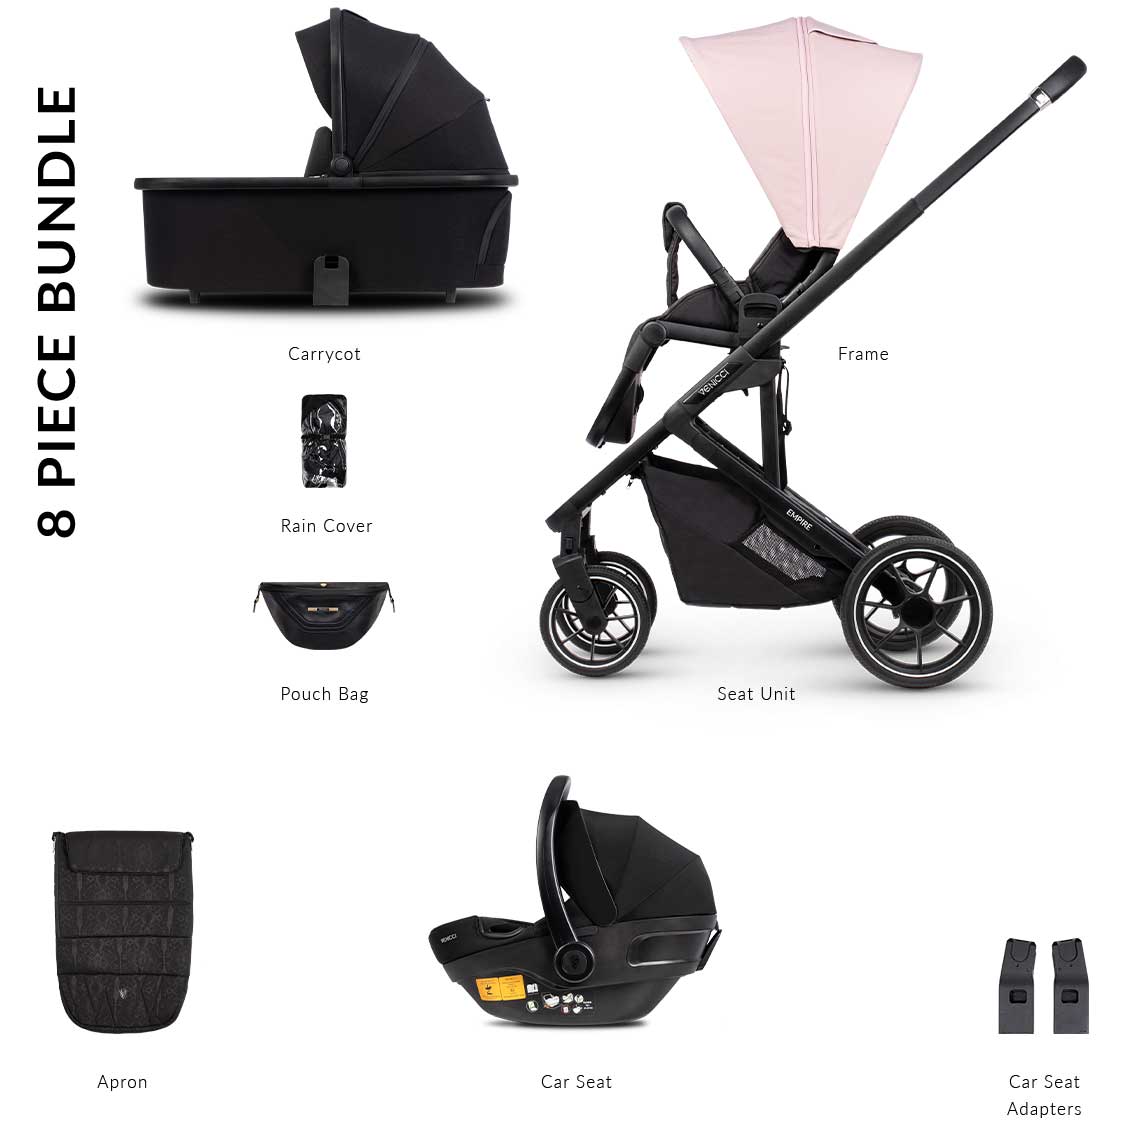 Venicci Empire 3 in 1 Travel System in Silk Pink Travel Systems